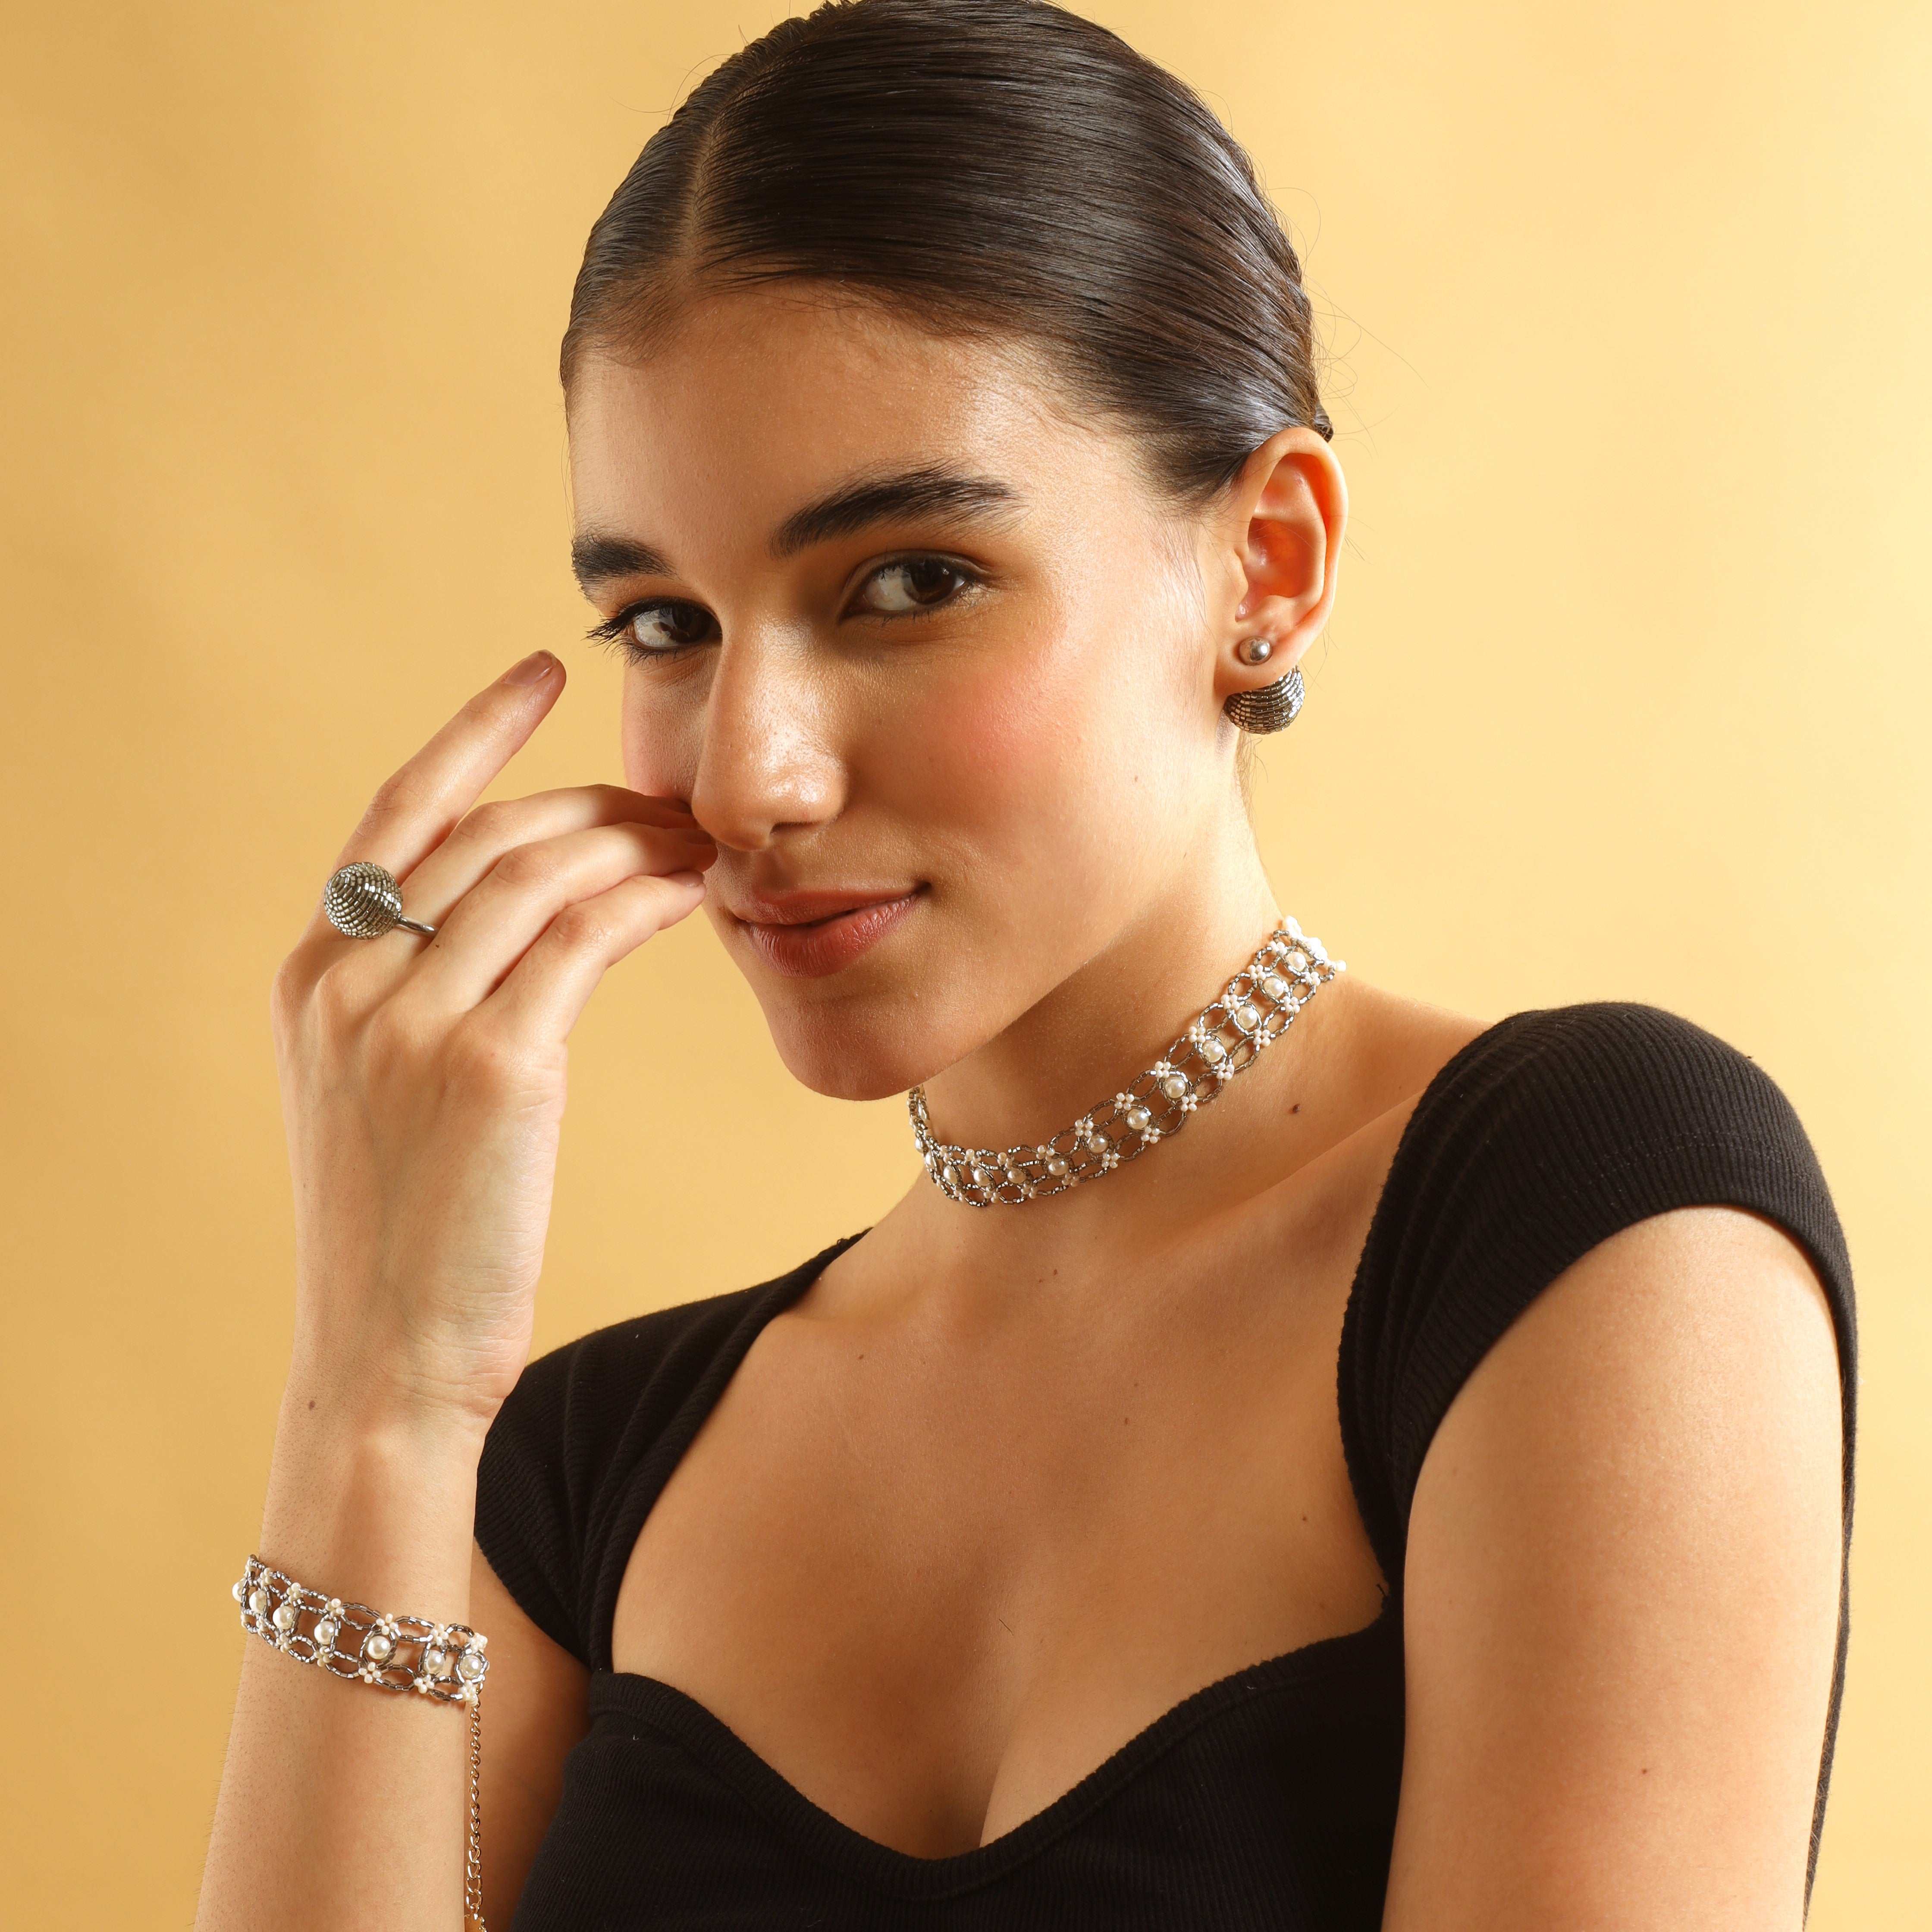 TFC Silver Cutdana and Pearl Choker Necklace-Enhance your elegance with our collection of gold-plated necklaces for women. Choose from stunning pendant necklaces, chic choker necklaces, and trendy layered necklaces. Our sleek and dainty designs are both affordable and anti-tarnish, ensuring lasting beauty. Enjoy the cheapest fashion jewellery, lightweight and stylish- only at The Fun Company.